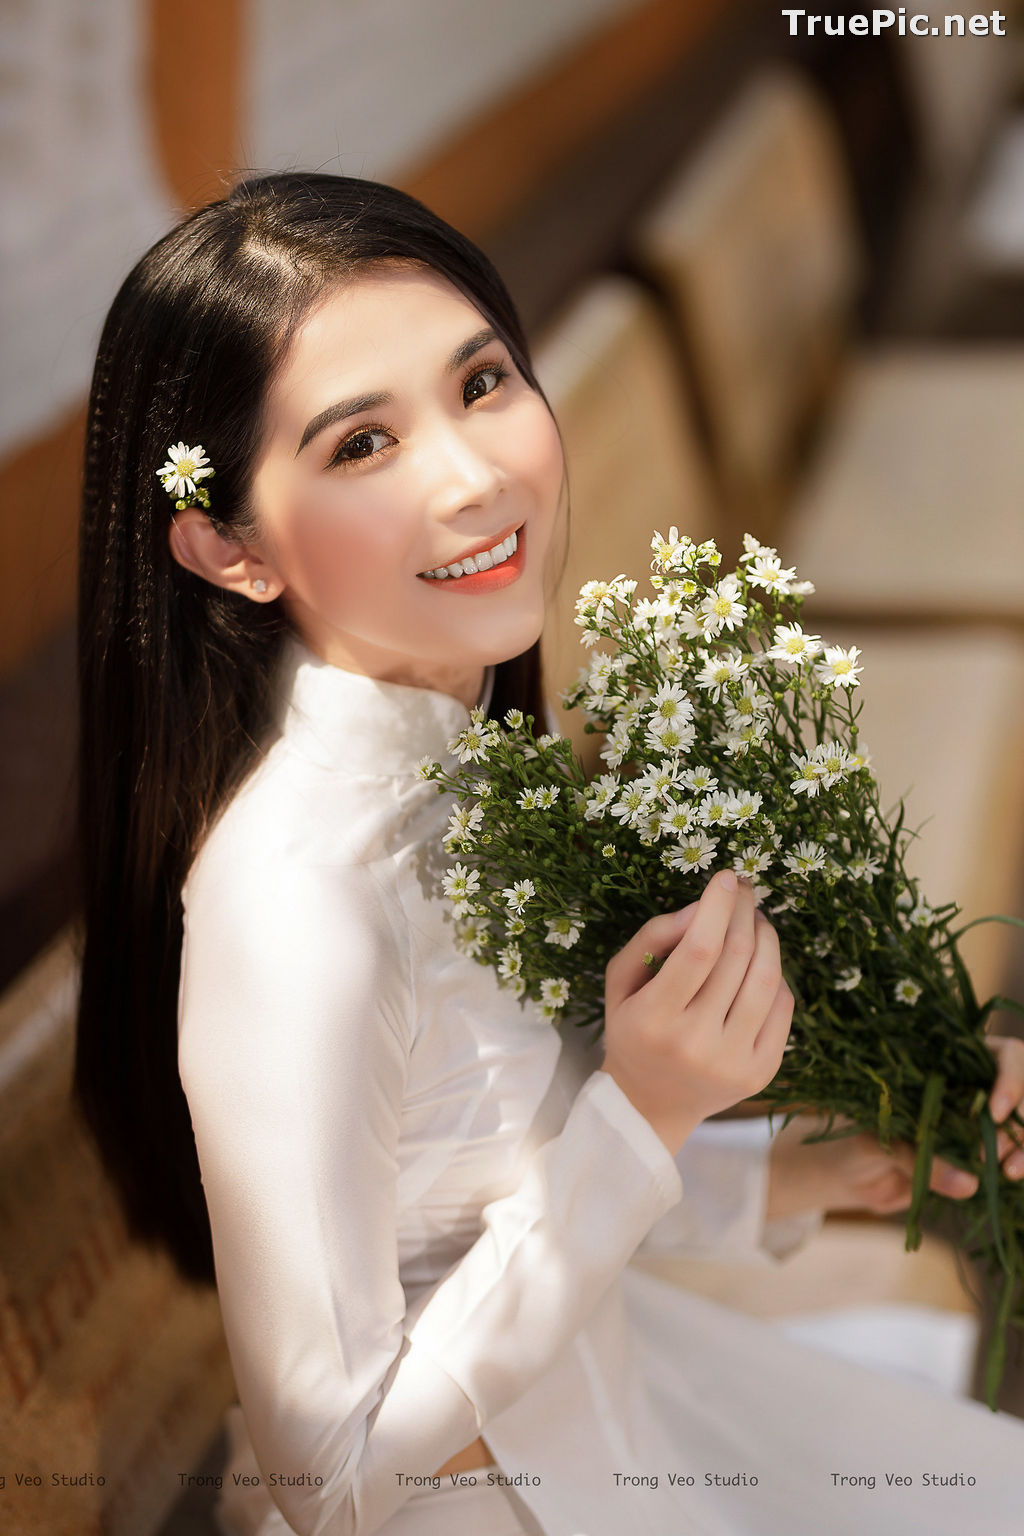 Image The Beauty of Vietnamese Girls with Traditional Dress (Ao Dai) #2 - TruePic.net - Picture-11